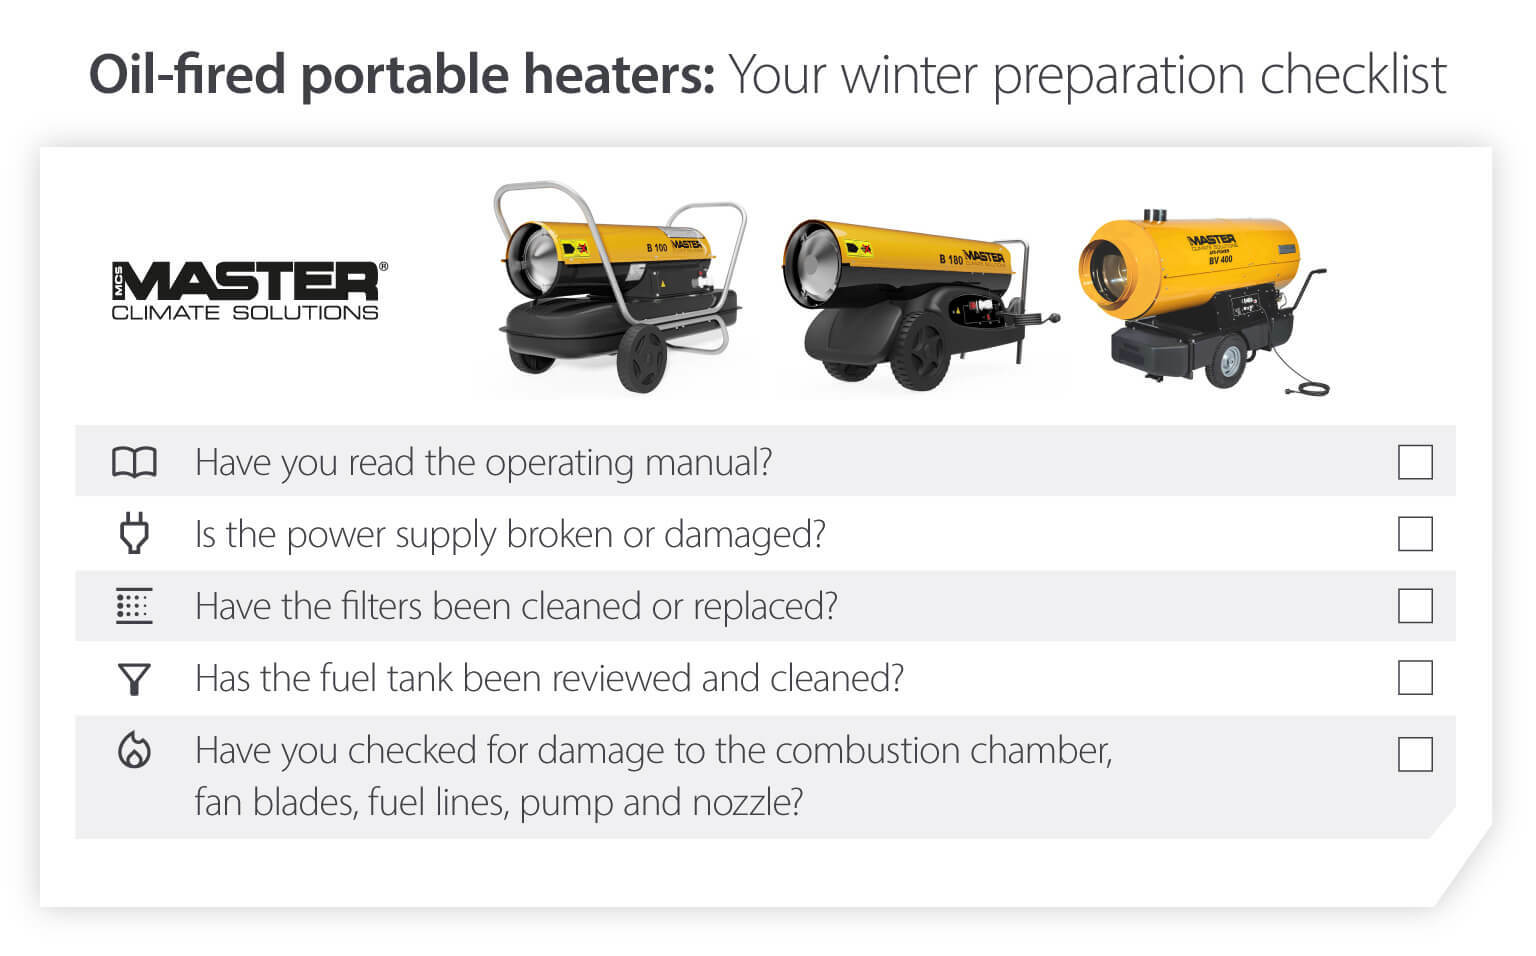 Winter oil fired heater preparation checklist list to ensure heaters work for winter and cold temperatures - Infographic image